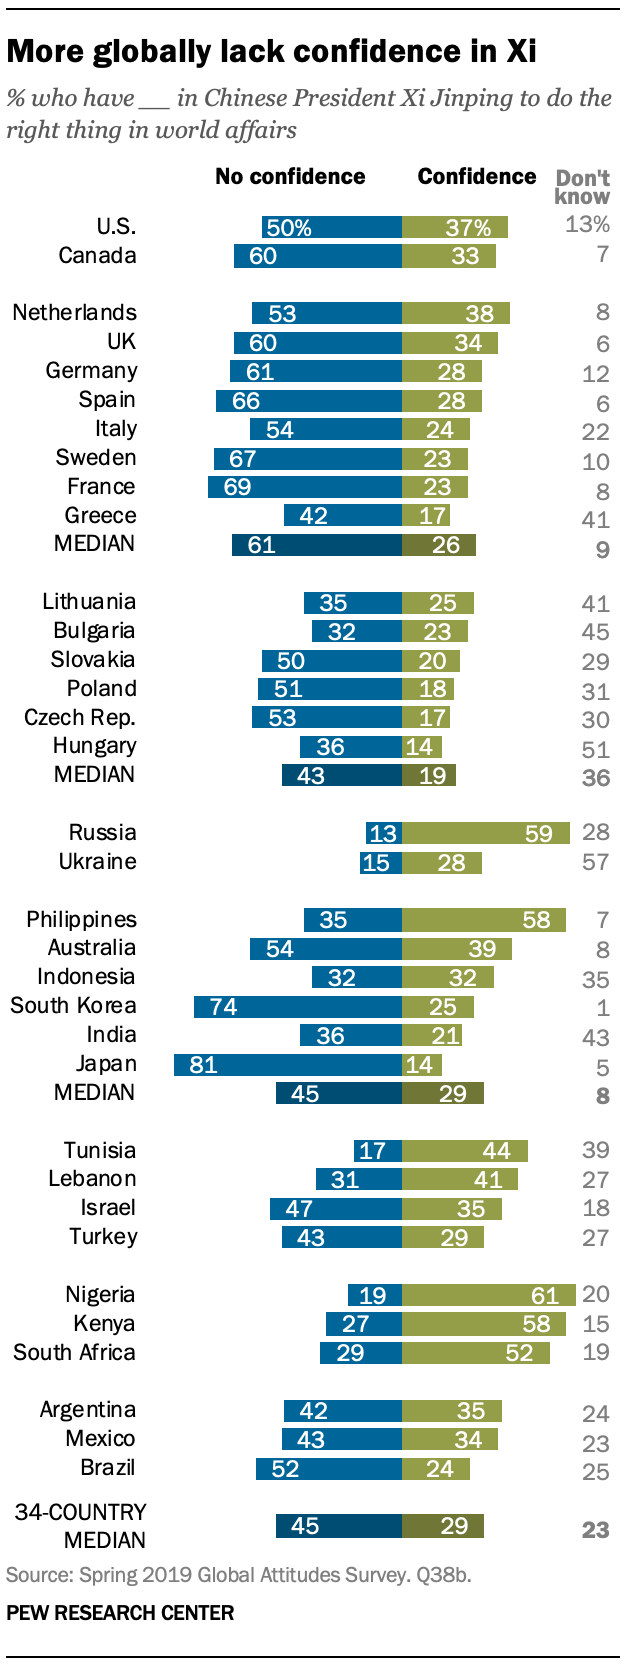 A chart showing more globally lack confidence in Xi